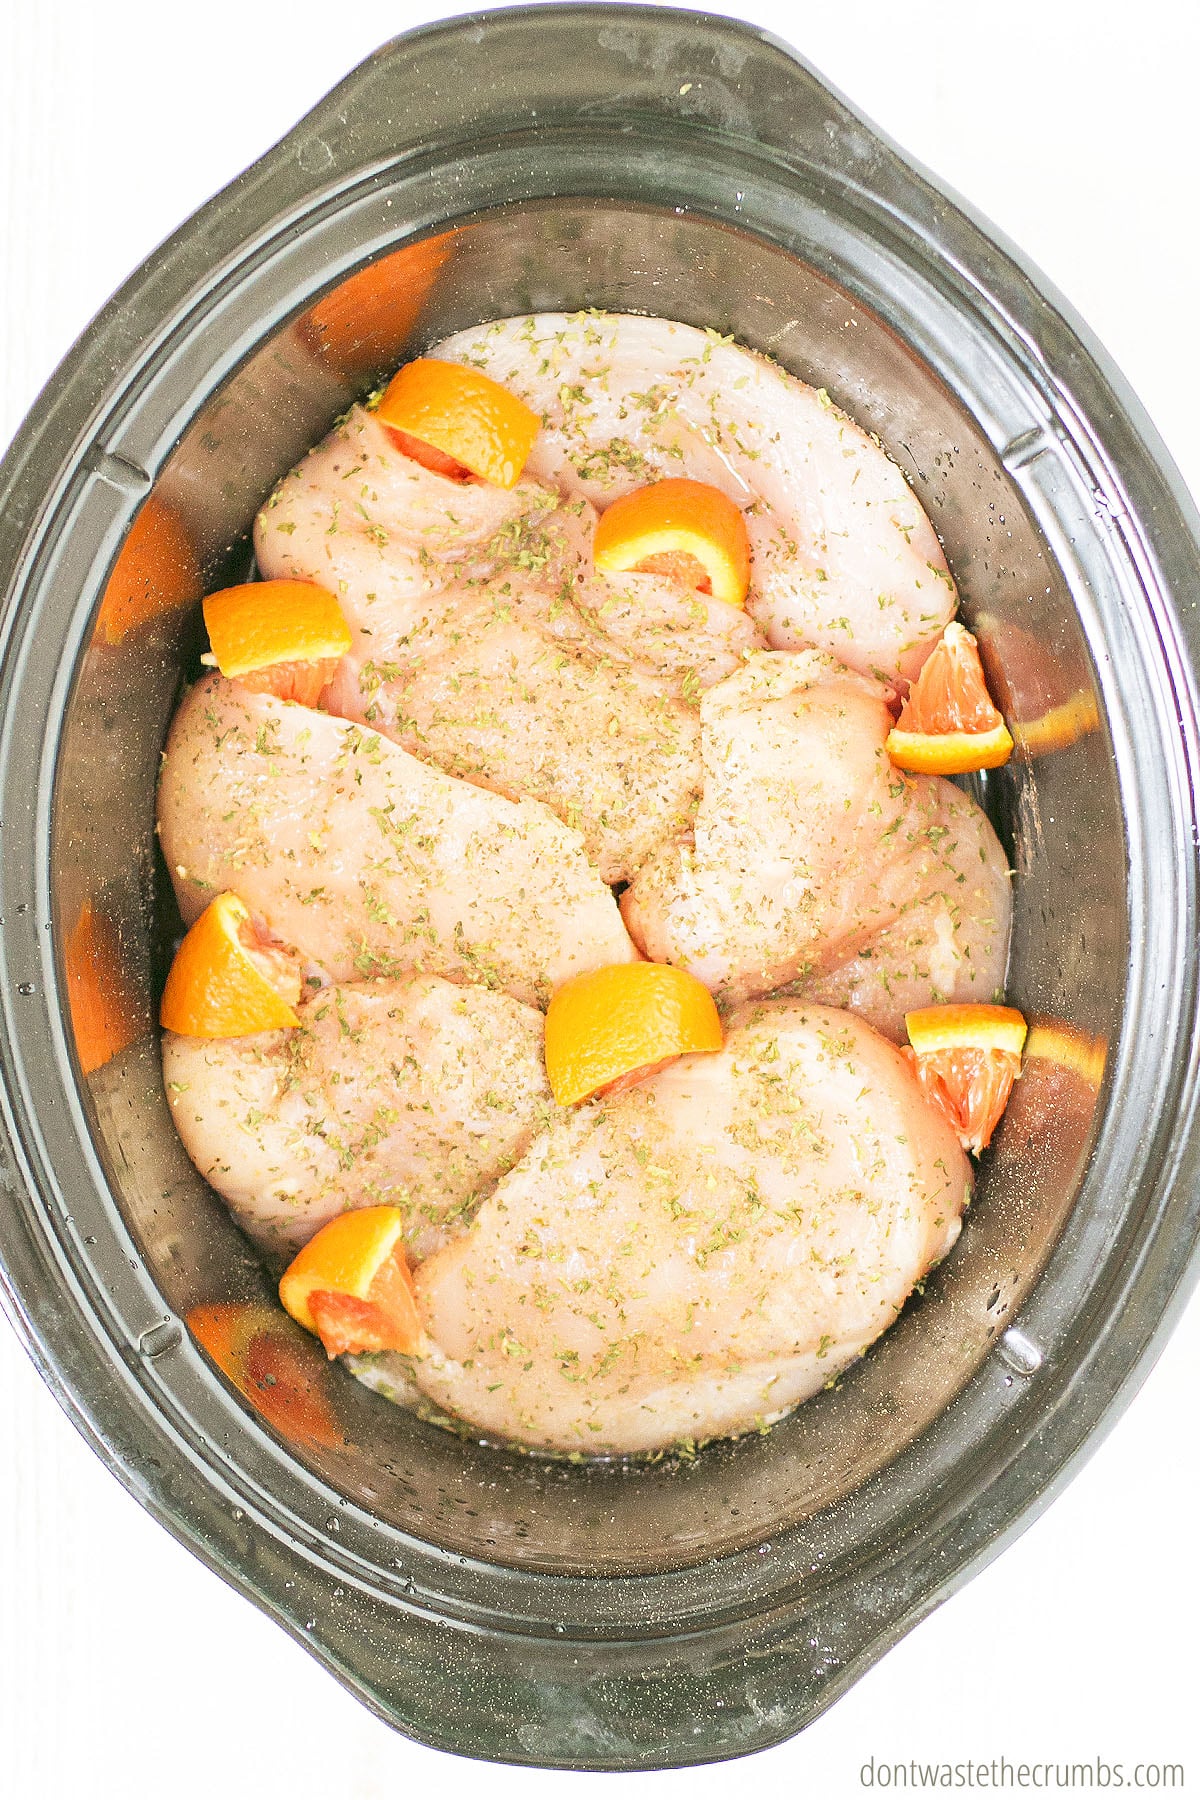 Slow cooker with raw chicken breast and slices of oranges.